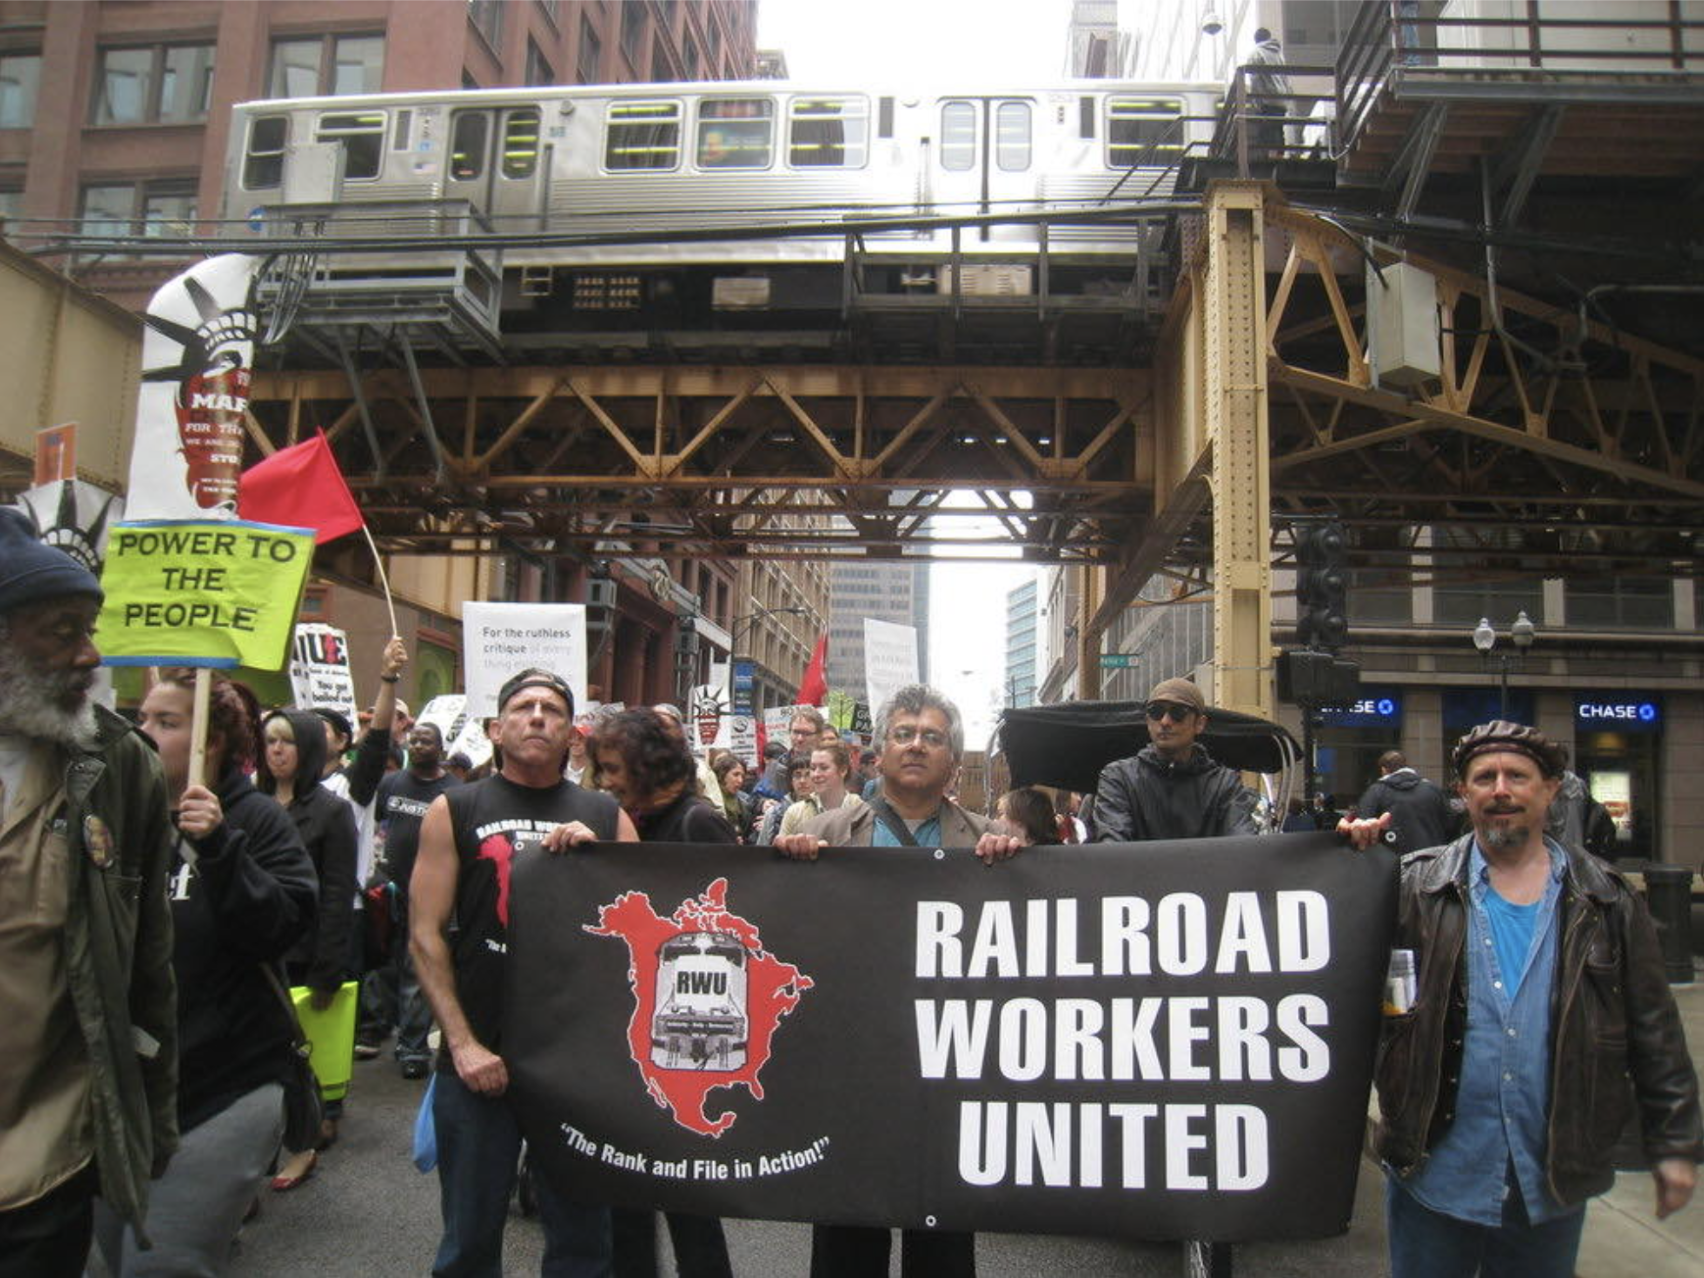 How the Rail Carriers, Wall Street, and the US Government Crushed Class I Freight Rail Workers